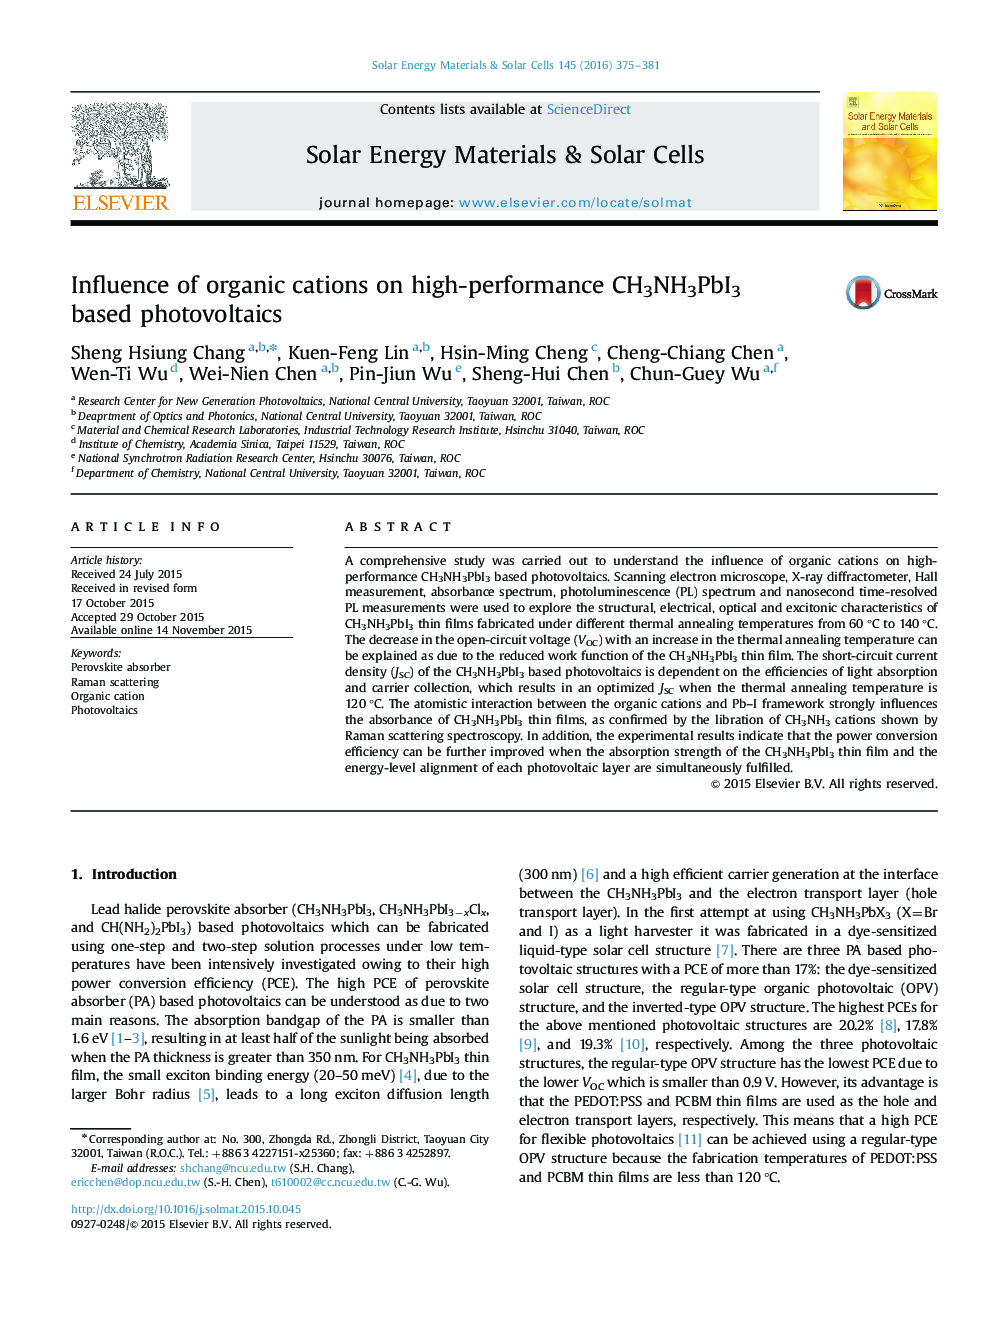 Influence of organic cations on high-performance CH3NH3PbI3 based photovoltaics